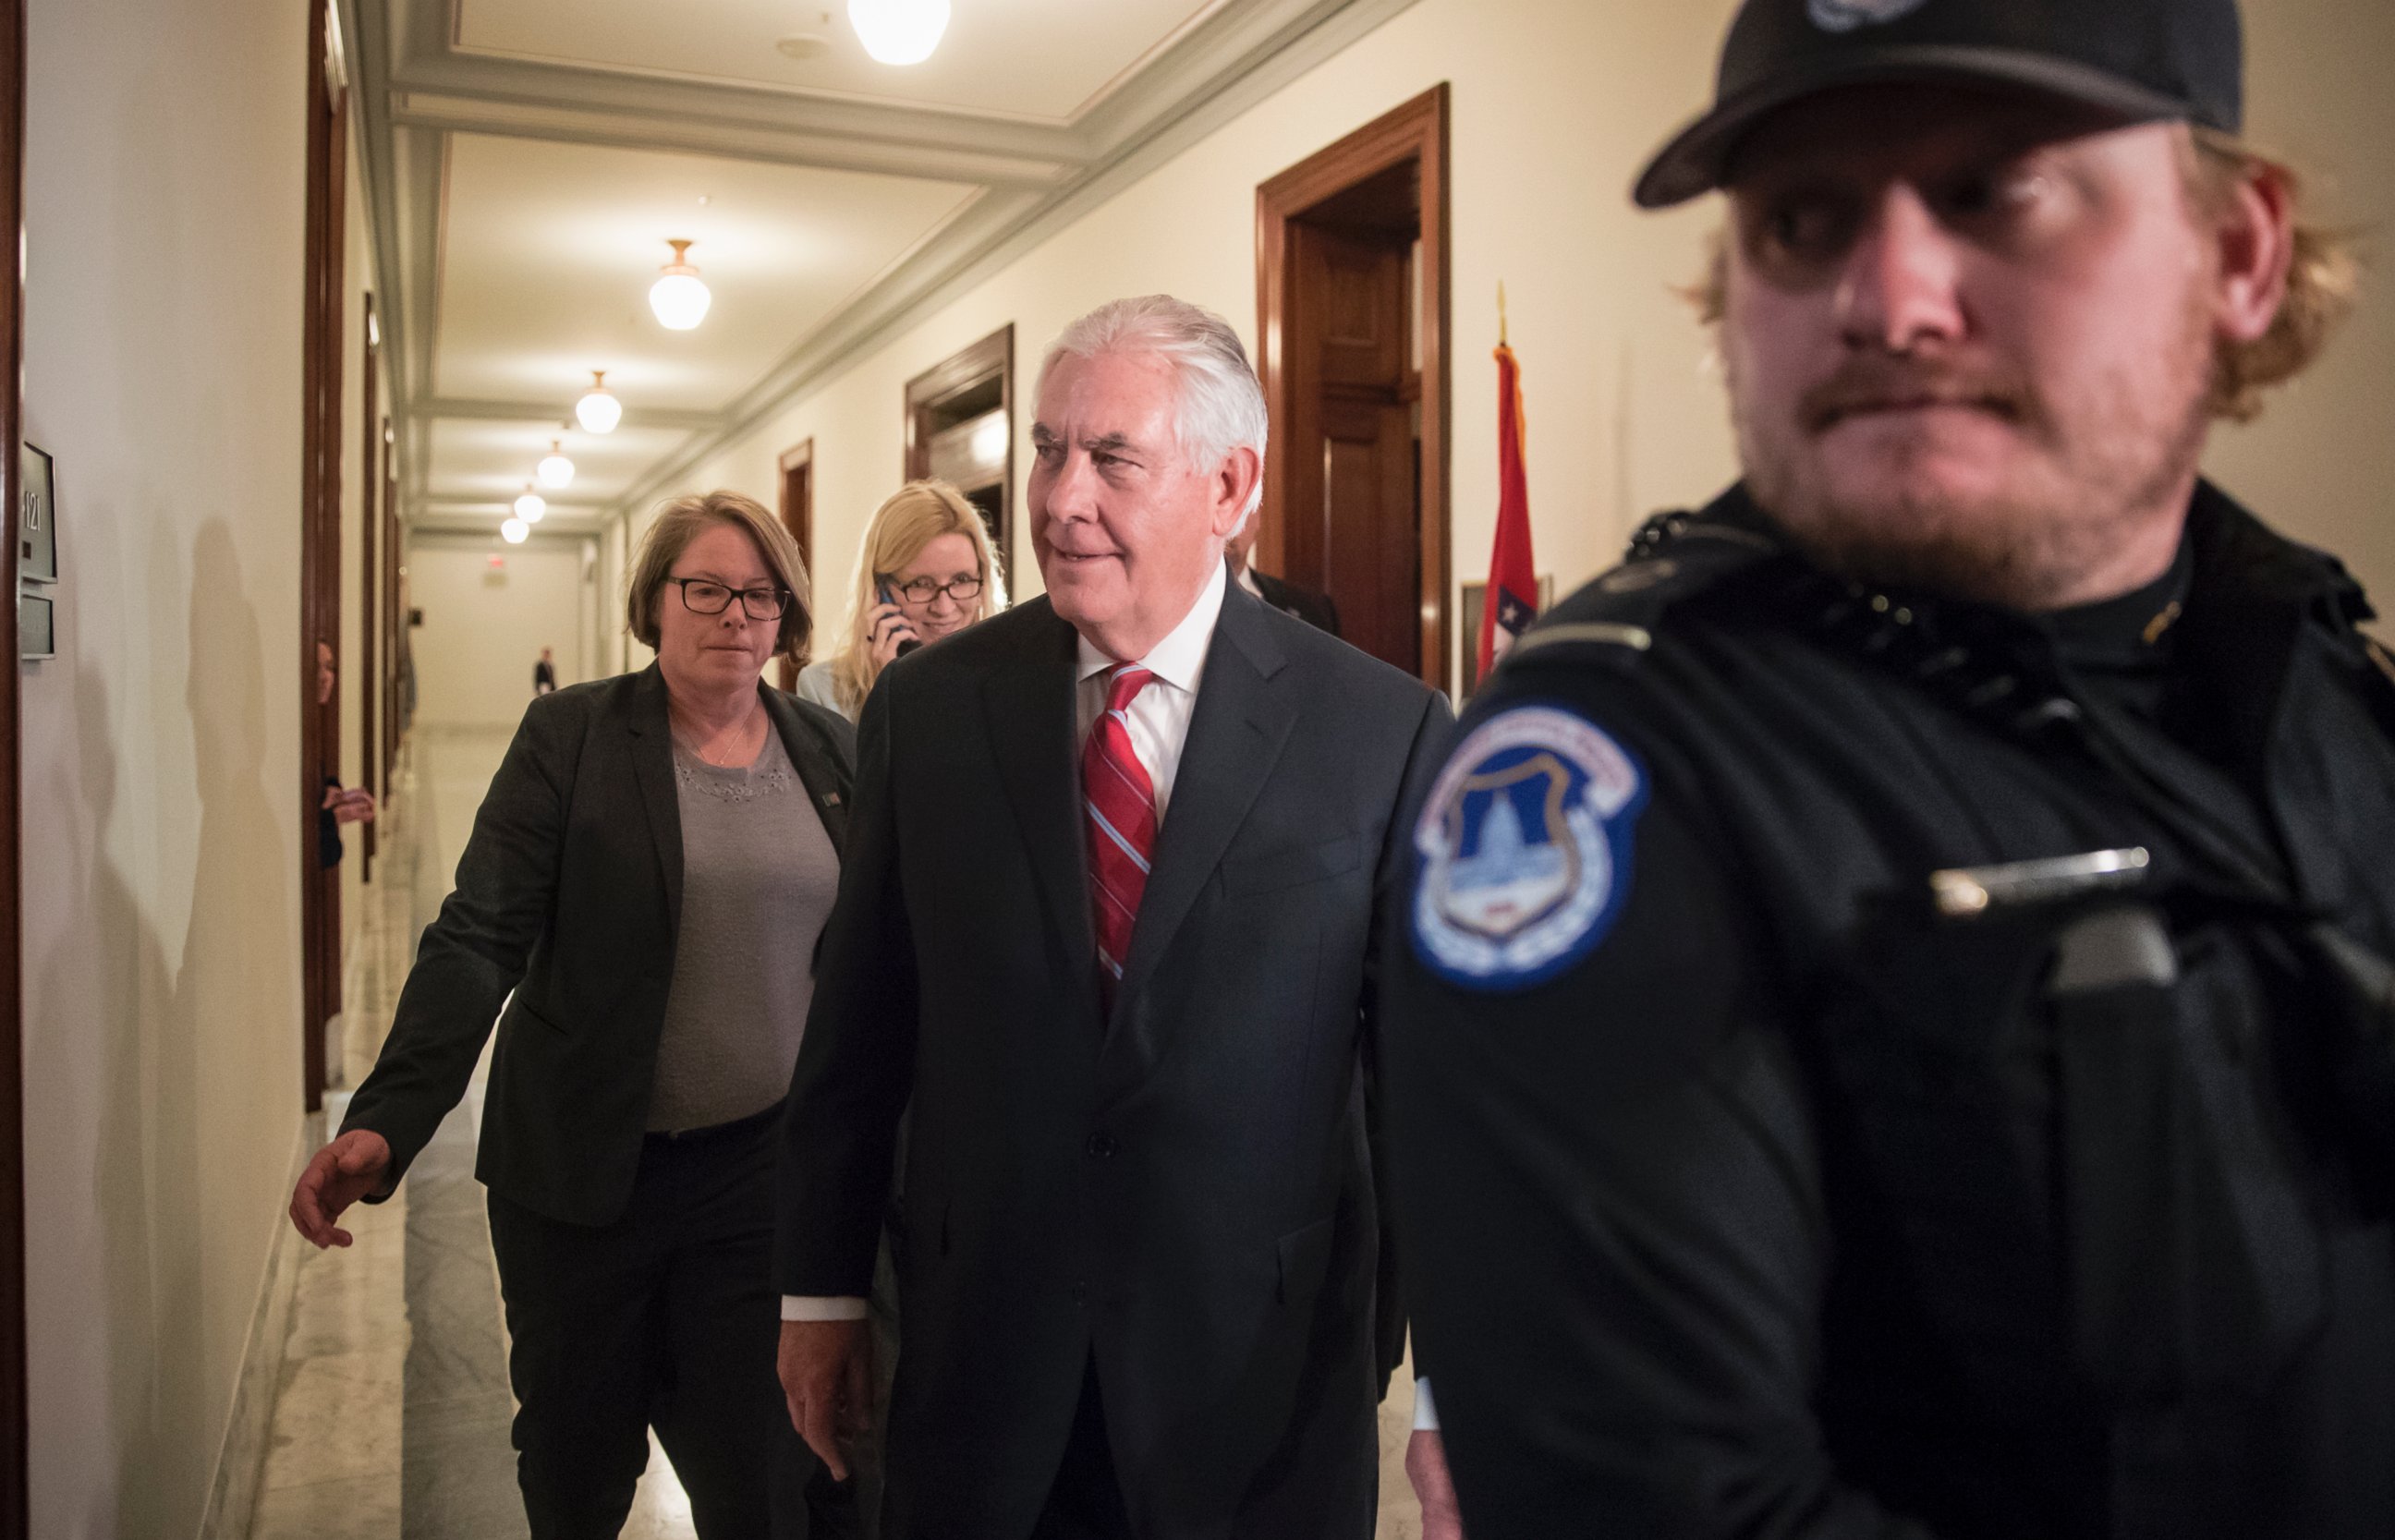 PHOTO: Secretary of State-designate Rex Tillerson arrives for a meeting with Sen. Chris Coons, D-Del., a member of the Senate Foreign Relations Committee which will conduct Tillerson's confirmation hearing, Jan. 4, 2017, on Capitol Hill in Washington.